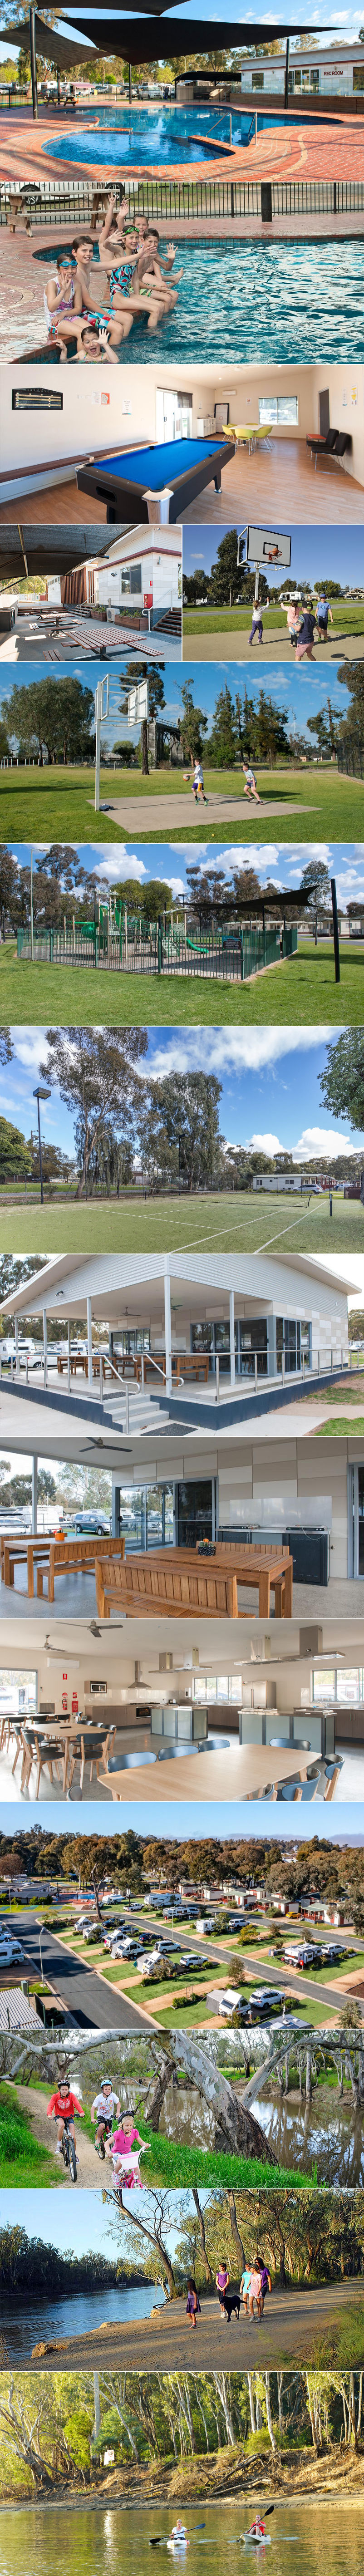 NRMA Echuca Holiday Park - Grounds and facilities